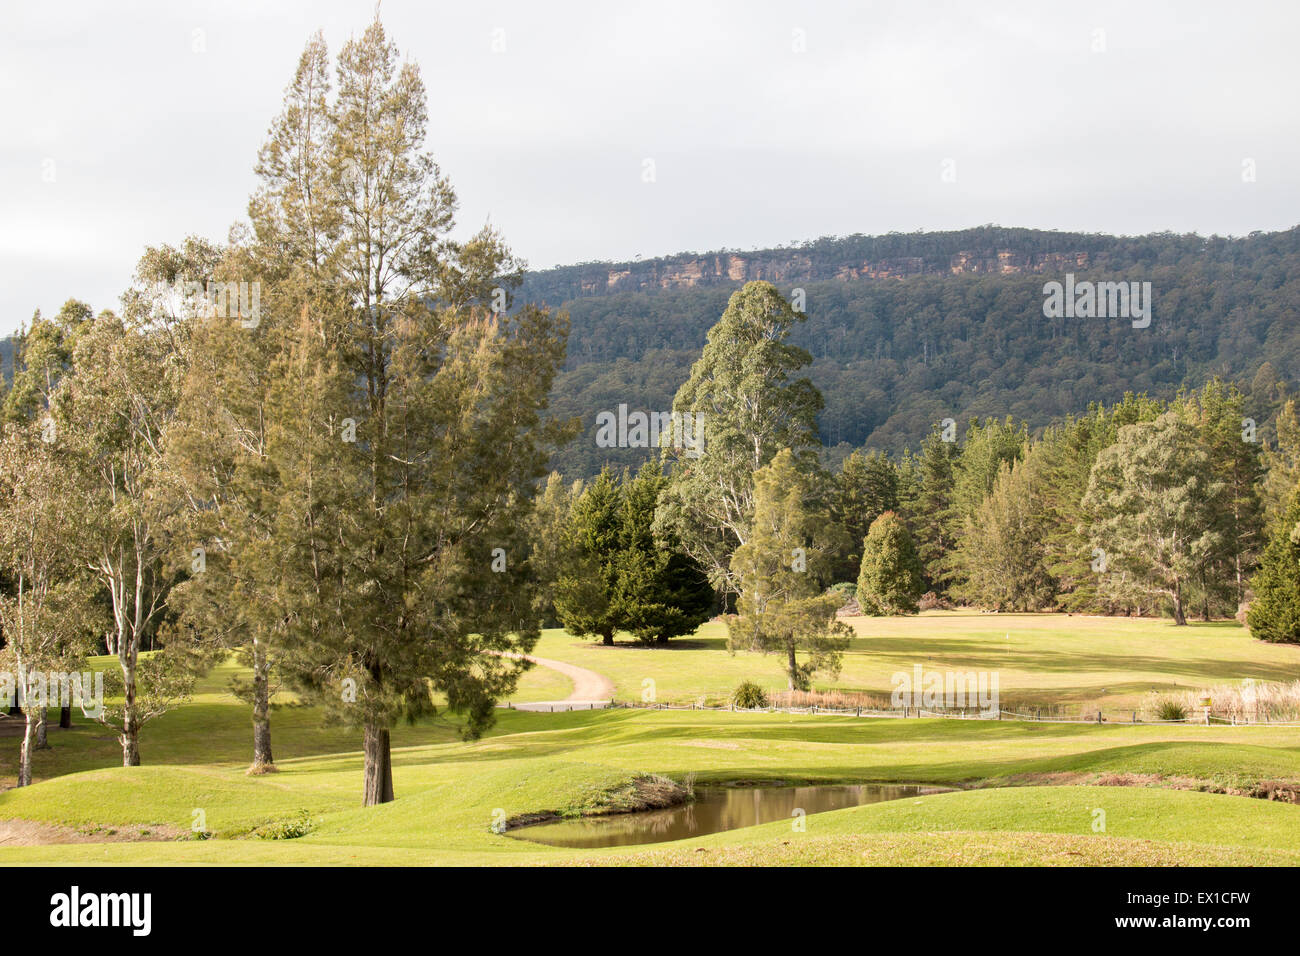 Kangaroo Valley Golf Course, Southern Highlands, New South Wales, Australie Banque D'Images